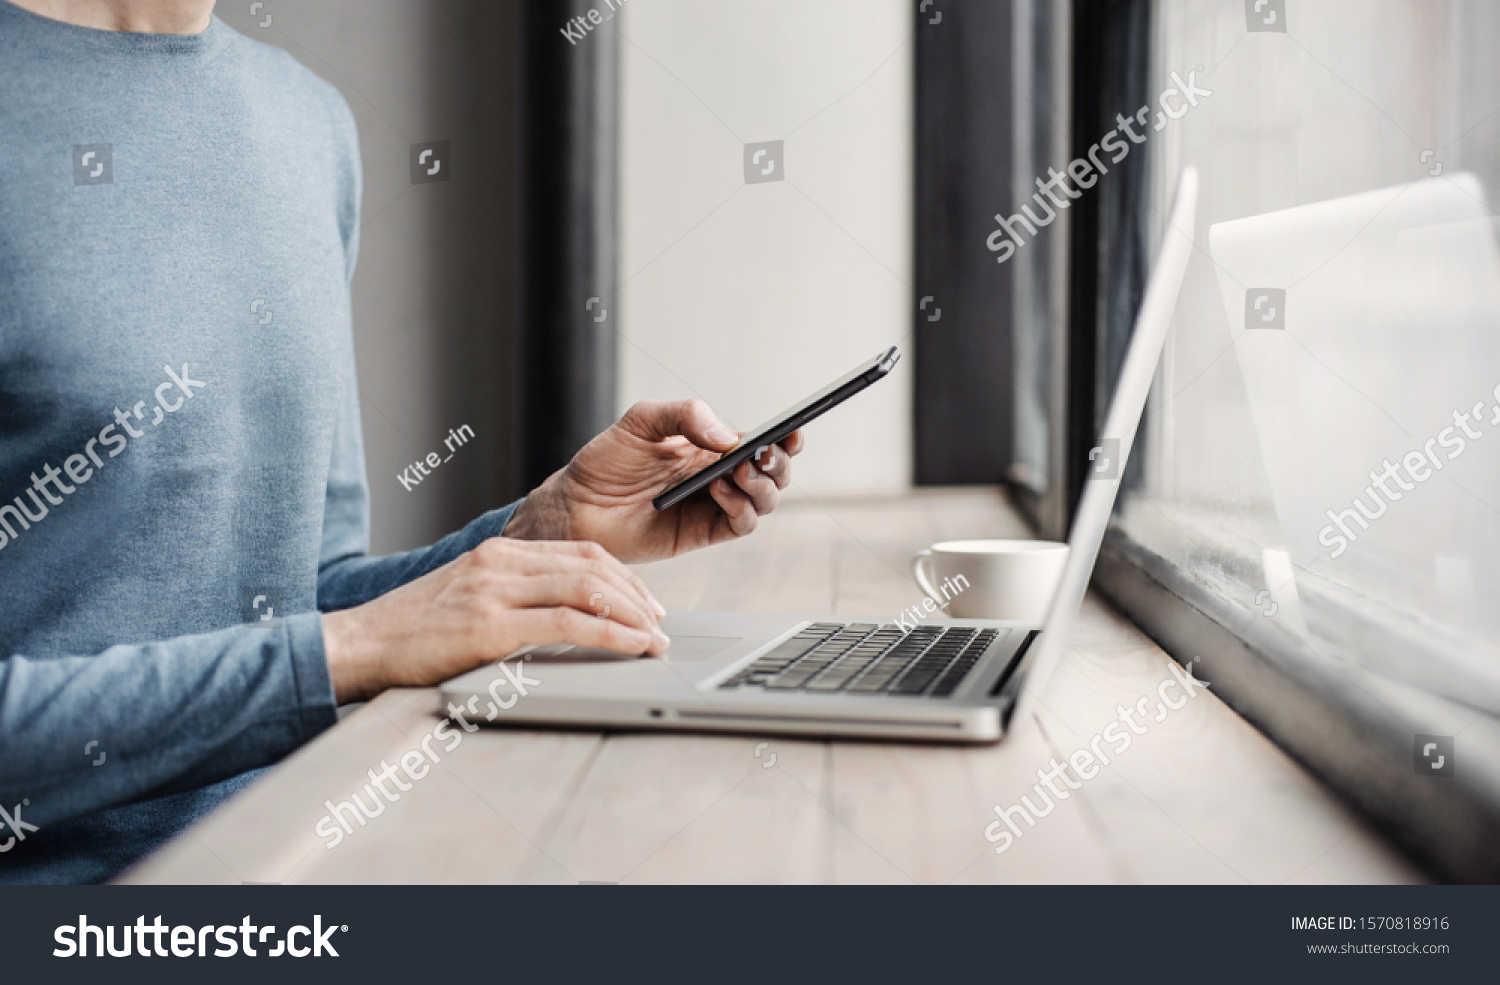 Businessman working on computer. Men using smart phone and laptop in the office. Internet marketing, finance, business concept #1570818916